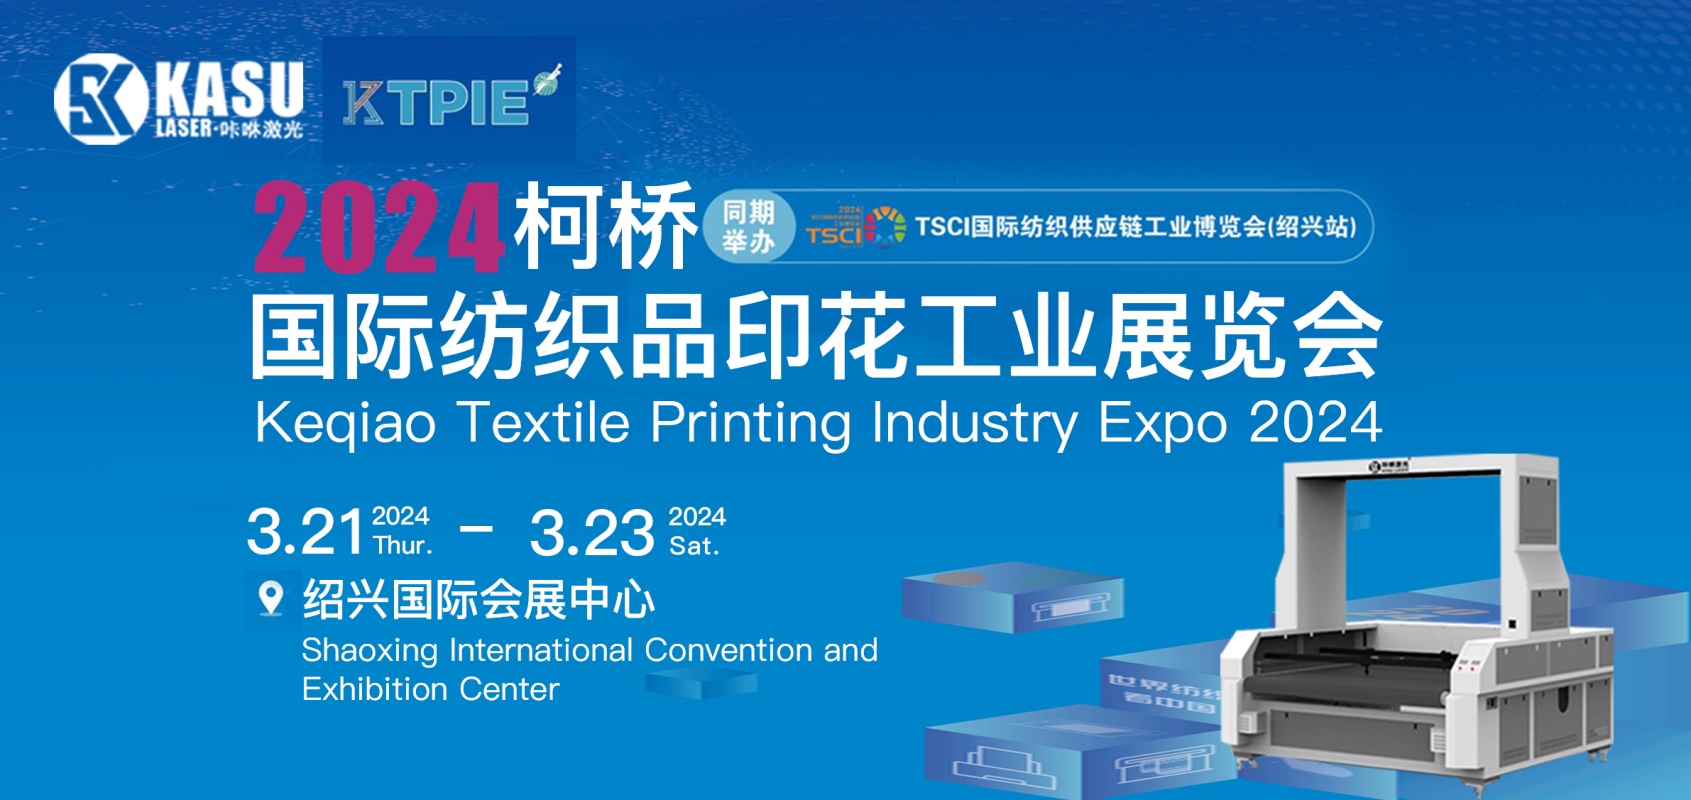 Keqiao Textile Printing Industry Expo 2024